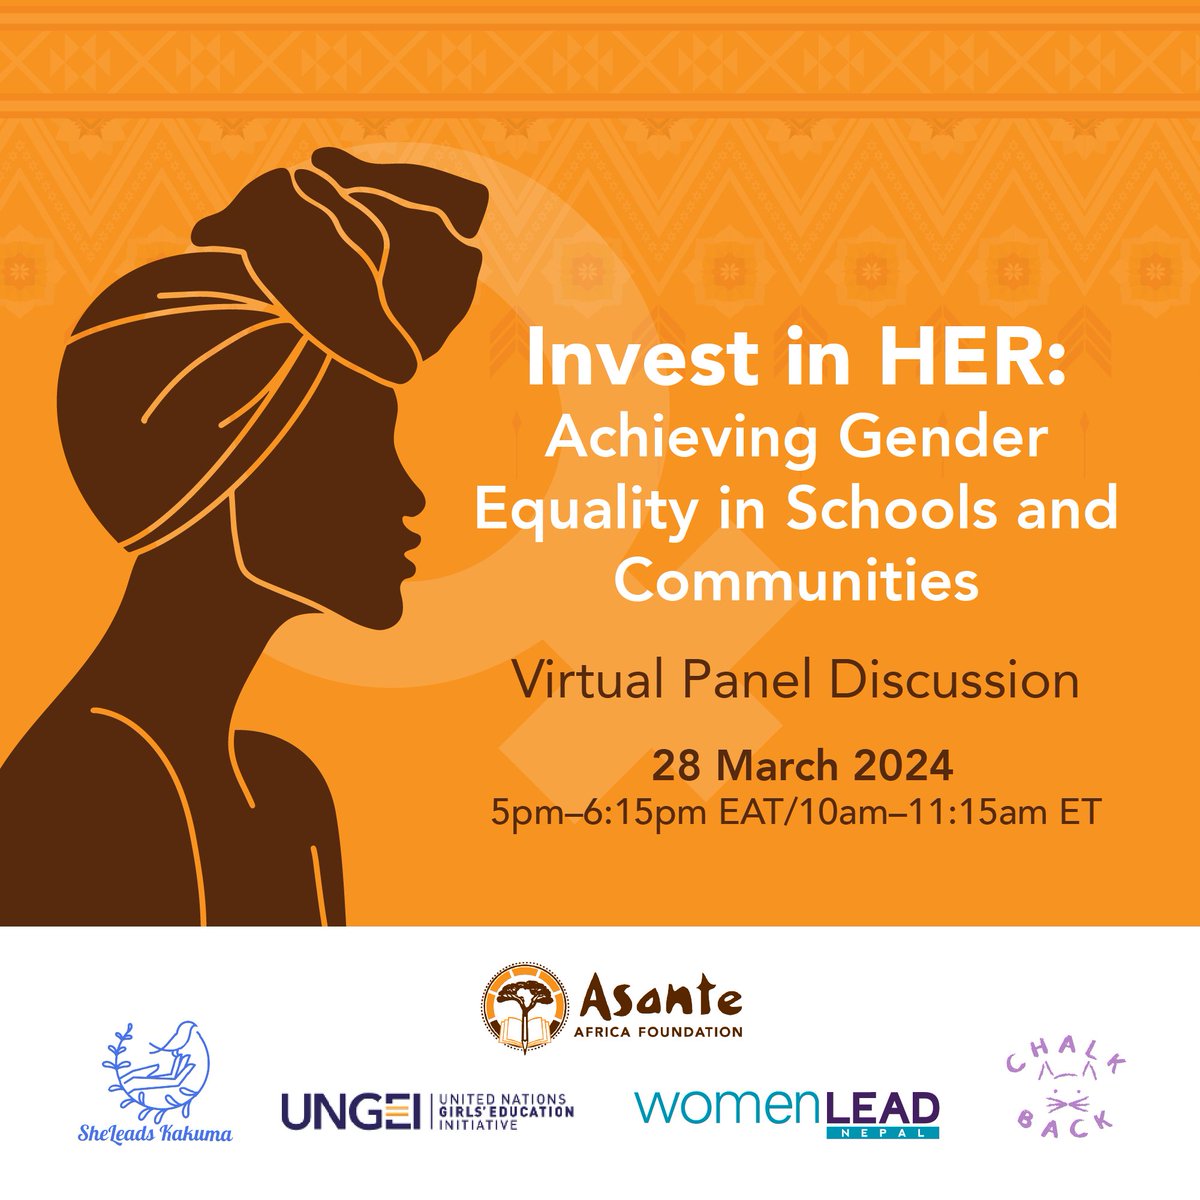 Have you registered for our virtual panel discussion yet? It's happening tomorrow at 5PM EAT/10AM ET/7AM PST. Register for FREE via asanteafrica.org/panel-discussi… and join the conversation! #InvestinHER #AAFempowers